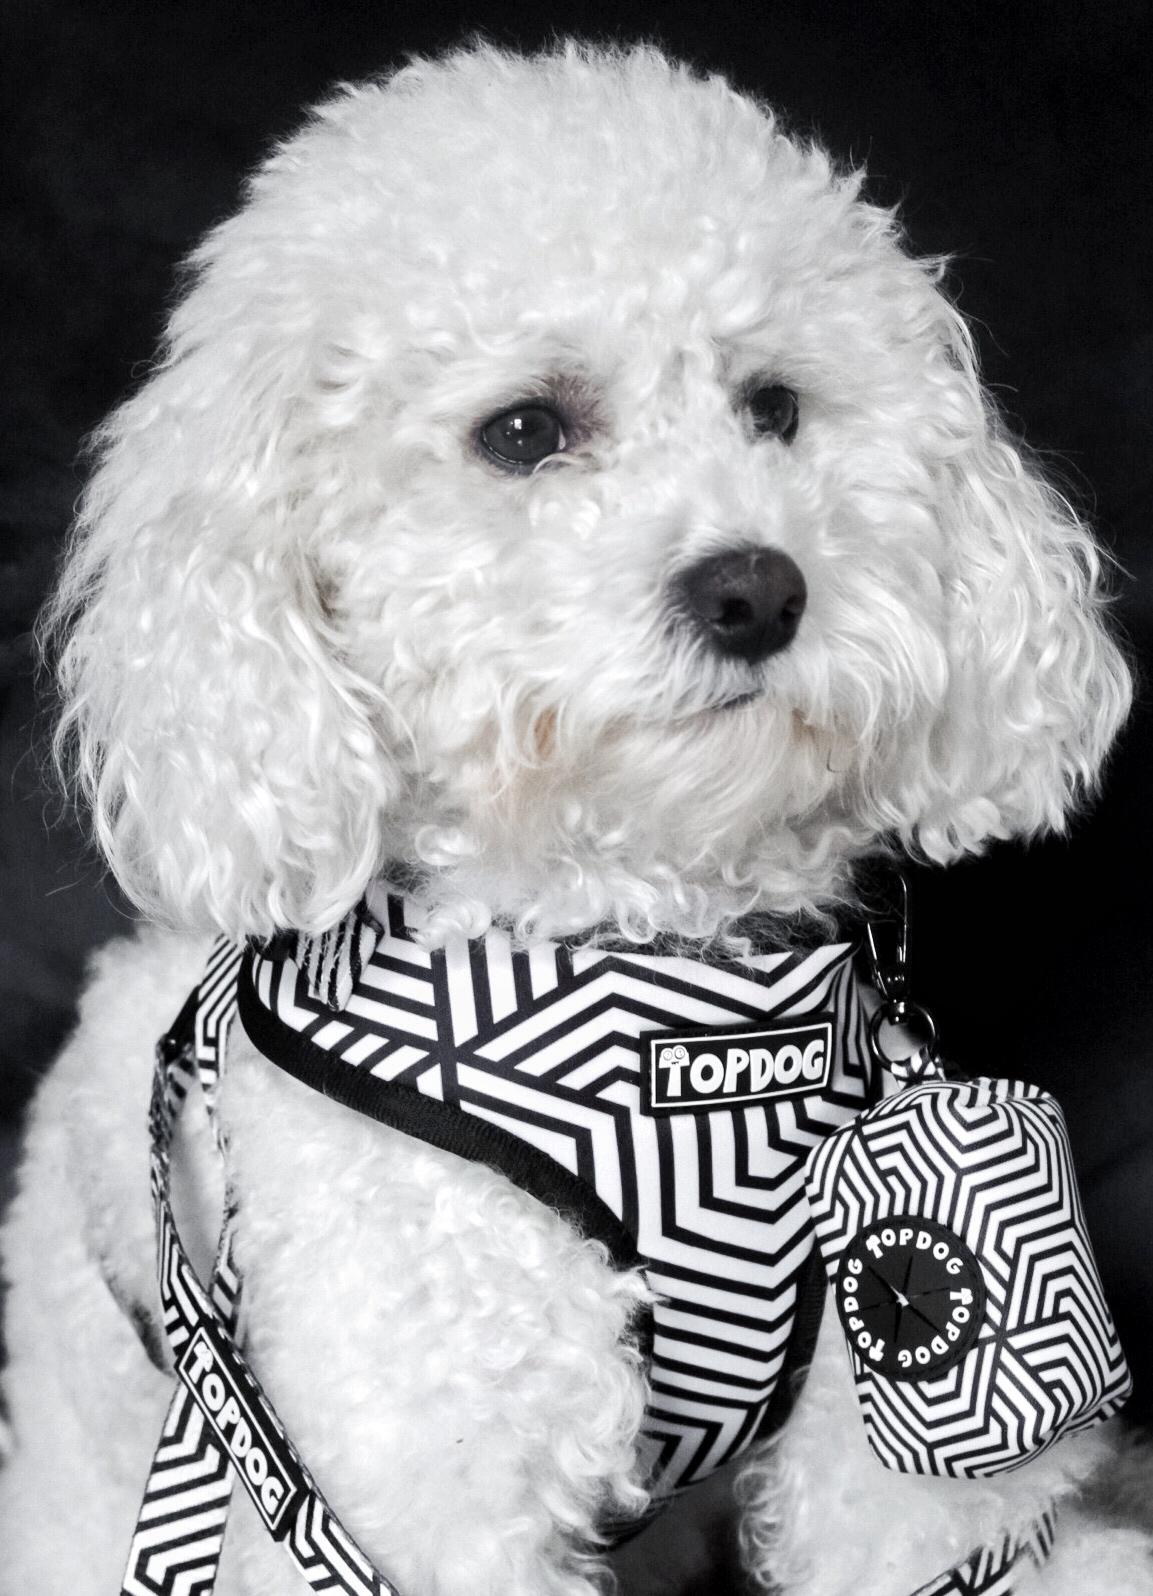 Bichon Frisé wearing a TopDog Harnesses It's Just an Illusion Adjustable dog harness